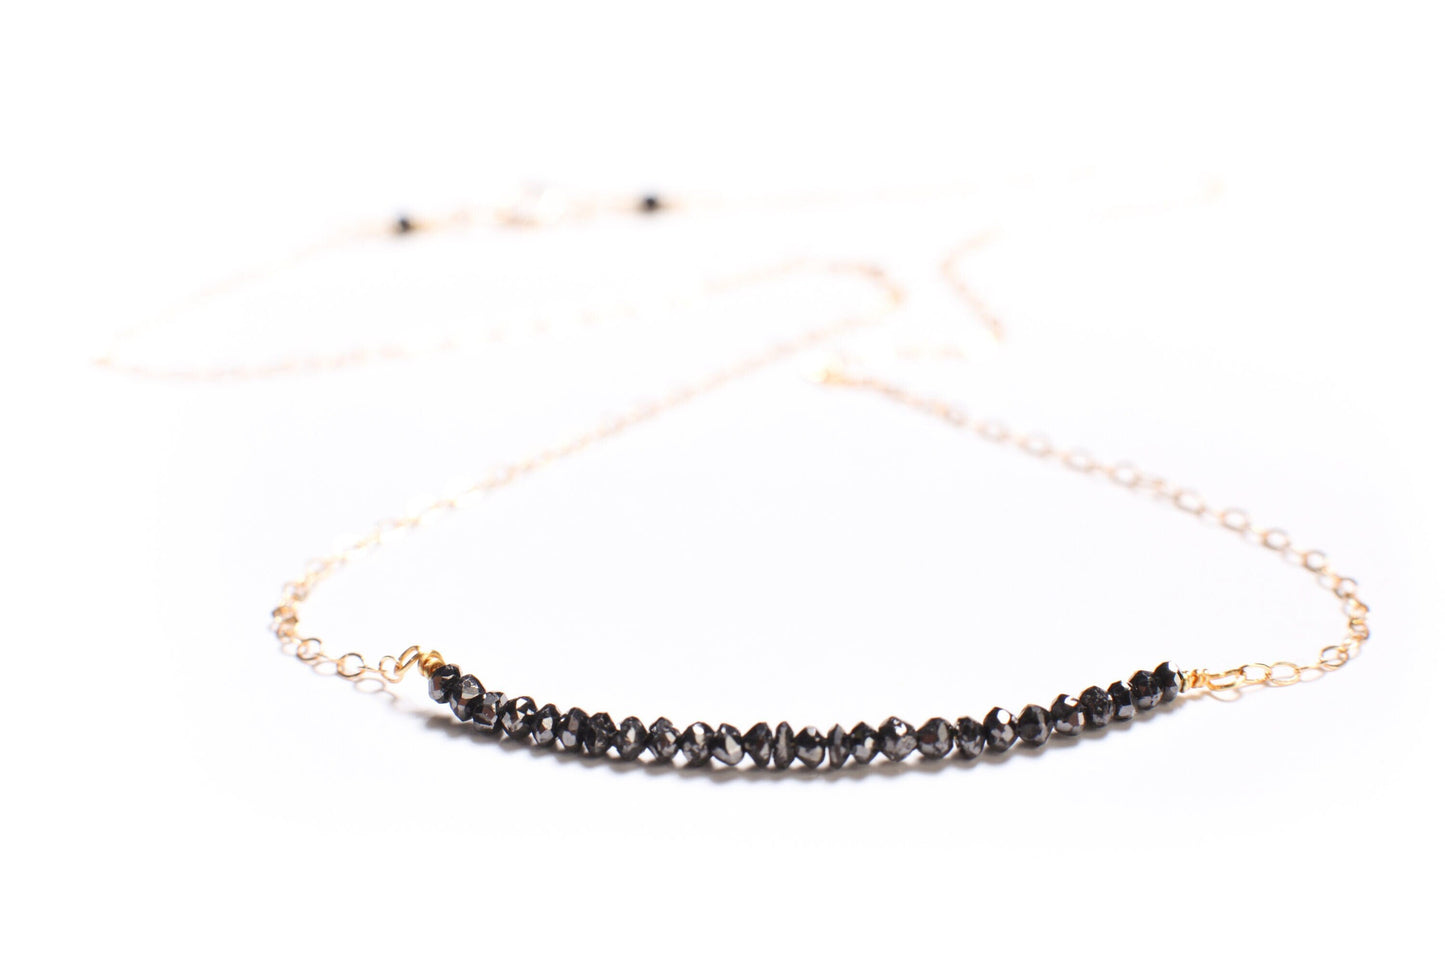 Natural Black Diamond Faceted 2mm Roundel in 14K Gold Filled or 925 Sterling Silver Bar Necklace, Precious Gift For her, healing gems.